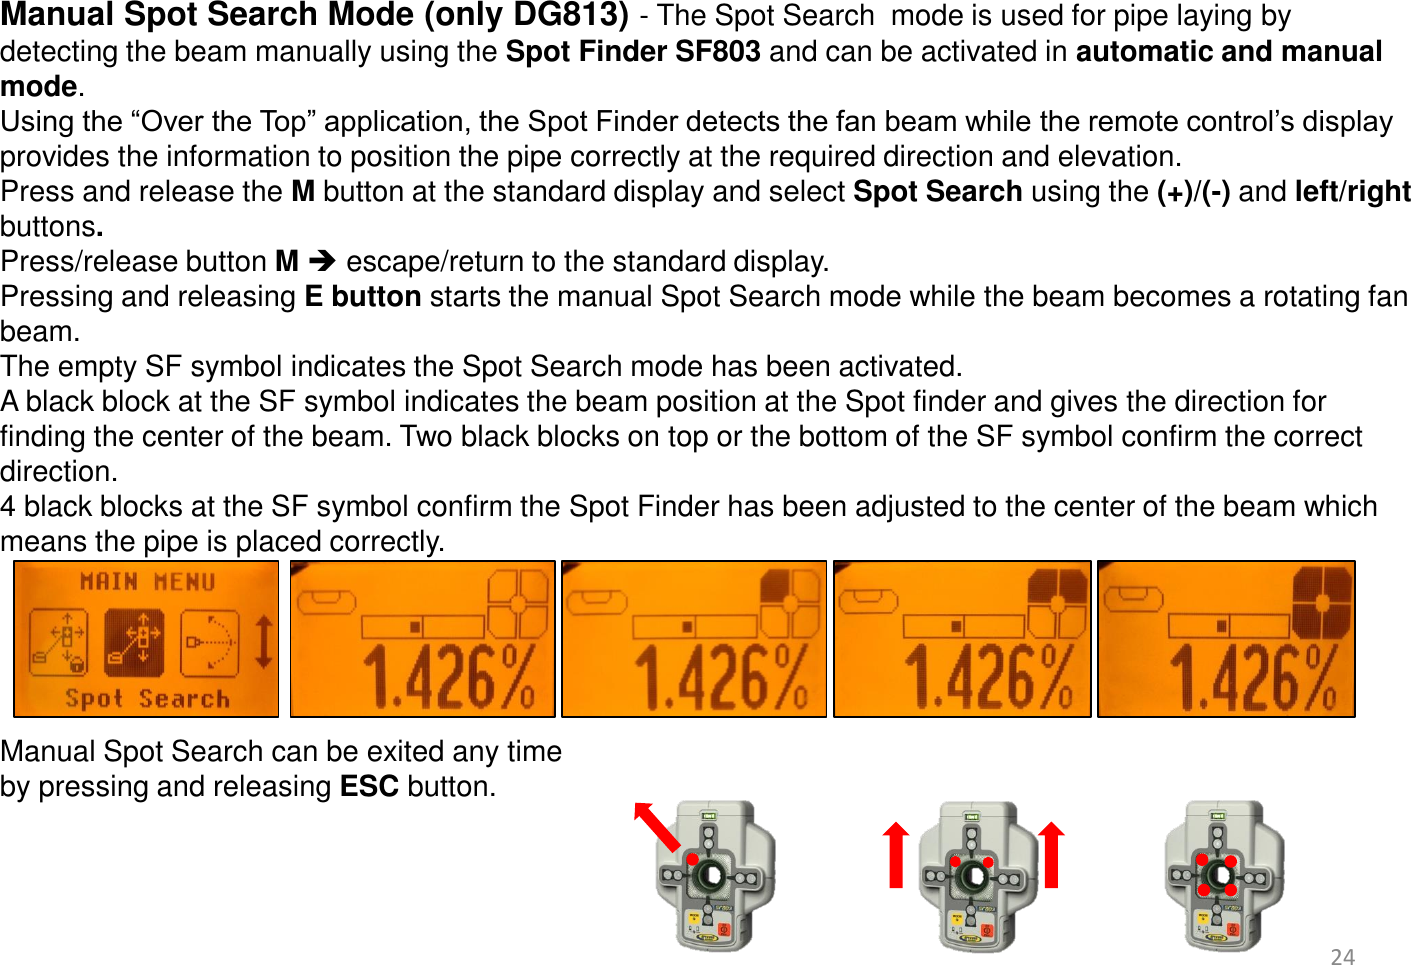  Manual Spot Search Mode (only DG813) - The Spot Search  mode is used for pipe laying by detecting the beam manually using the Spot Finder SF803 and can be activated in automatic and manual mode.  Using the “Over the Top” application, the Spot Finder detects the fan beam while the remote control’s display provides the information to position the pipe correctly at the required direction and elevation. Press and release the M button at the standard display and select Spot Search using the (+)/(-) and left/right buttons. Press/release button M  escape/return to the standard display. Pressing and releasing E button starts the manual Spot Search mode while the beam becomes a rotating fan beam.  The empty SF symbol indicates the Spot Search mode has been activated.  A black block at the SF symbol indicates the beam position at the Spot finder and gives the direction for finding the center of the beam. Two black blocks on top or the bottom of the SF symbol confirm the correct direction. 4 black blocks at the SF symbol confirm the Spot Finder has been adjusted to the center of the beam which means the pipe is placed correctly.      Manual Spot Search can be exited any time  by pressing and releasing ESC button.    24 